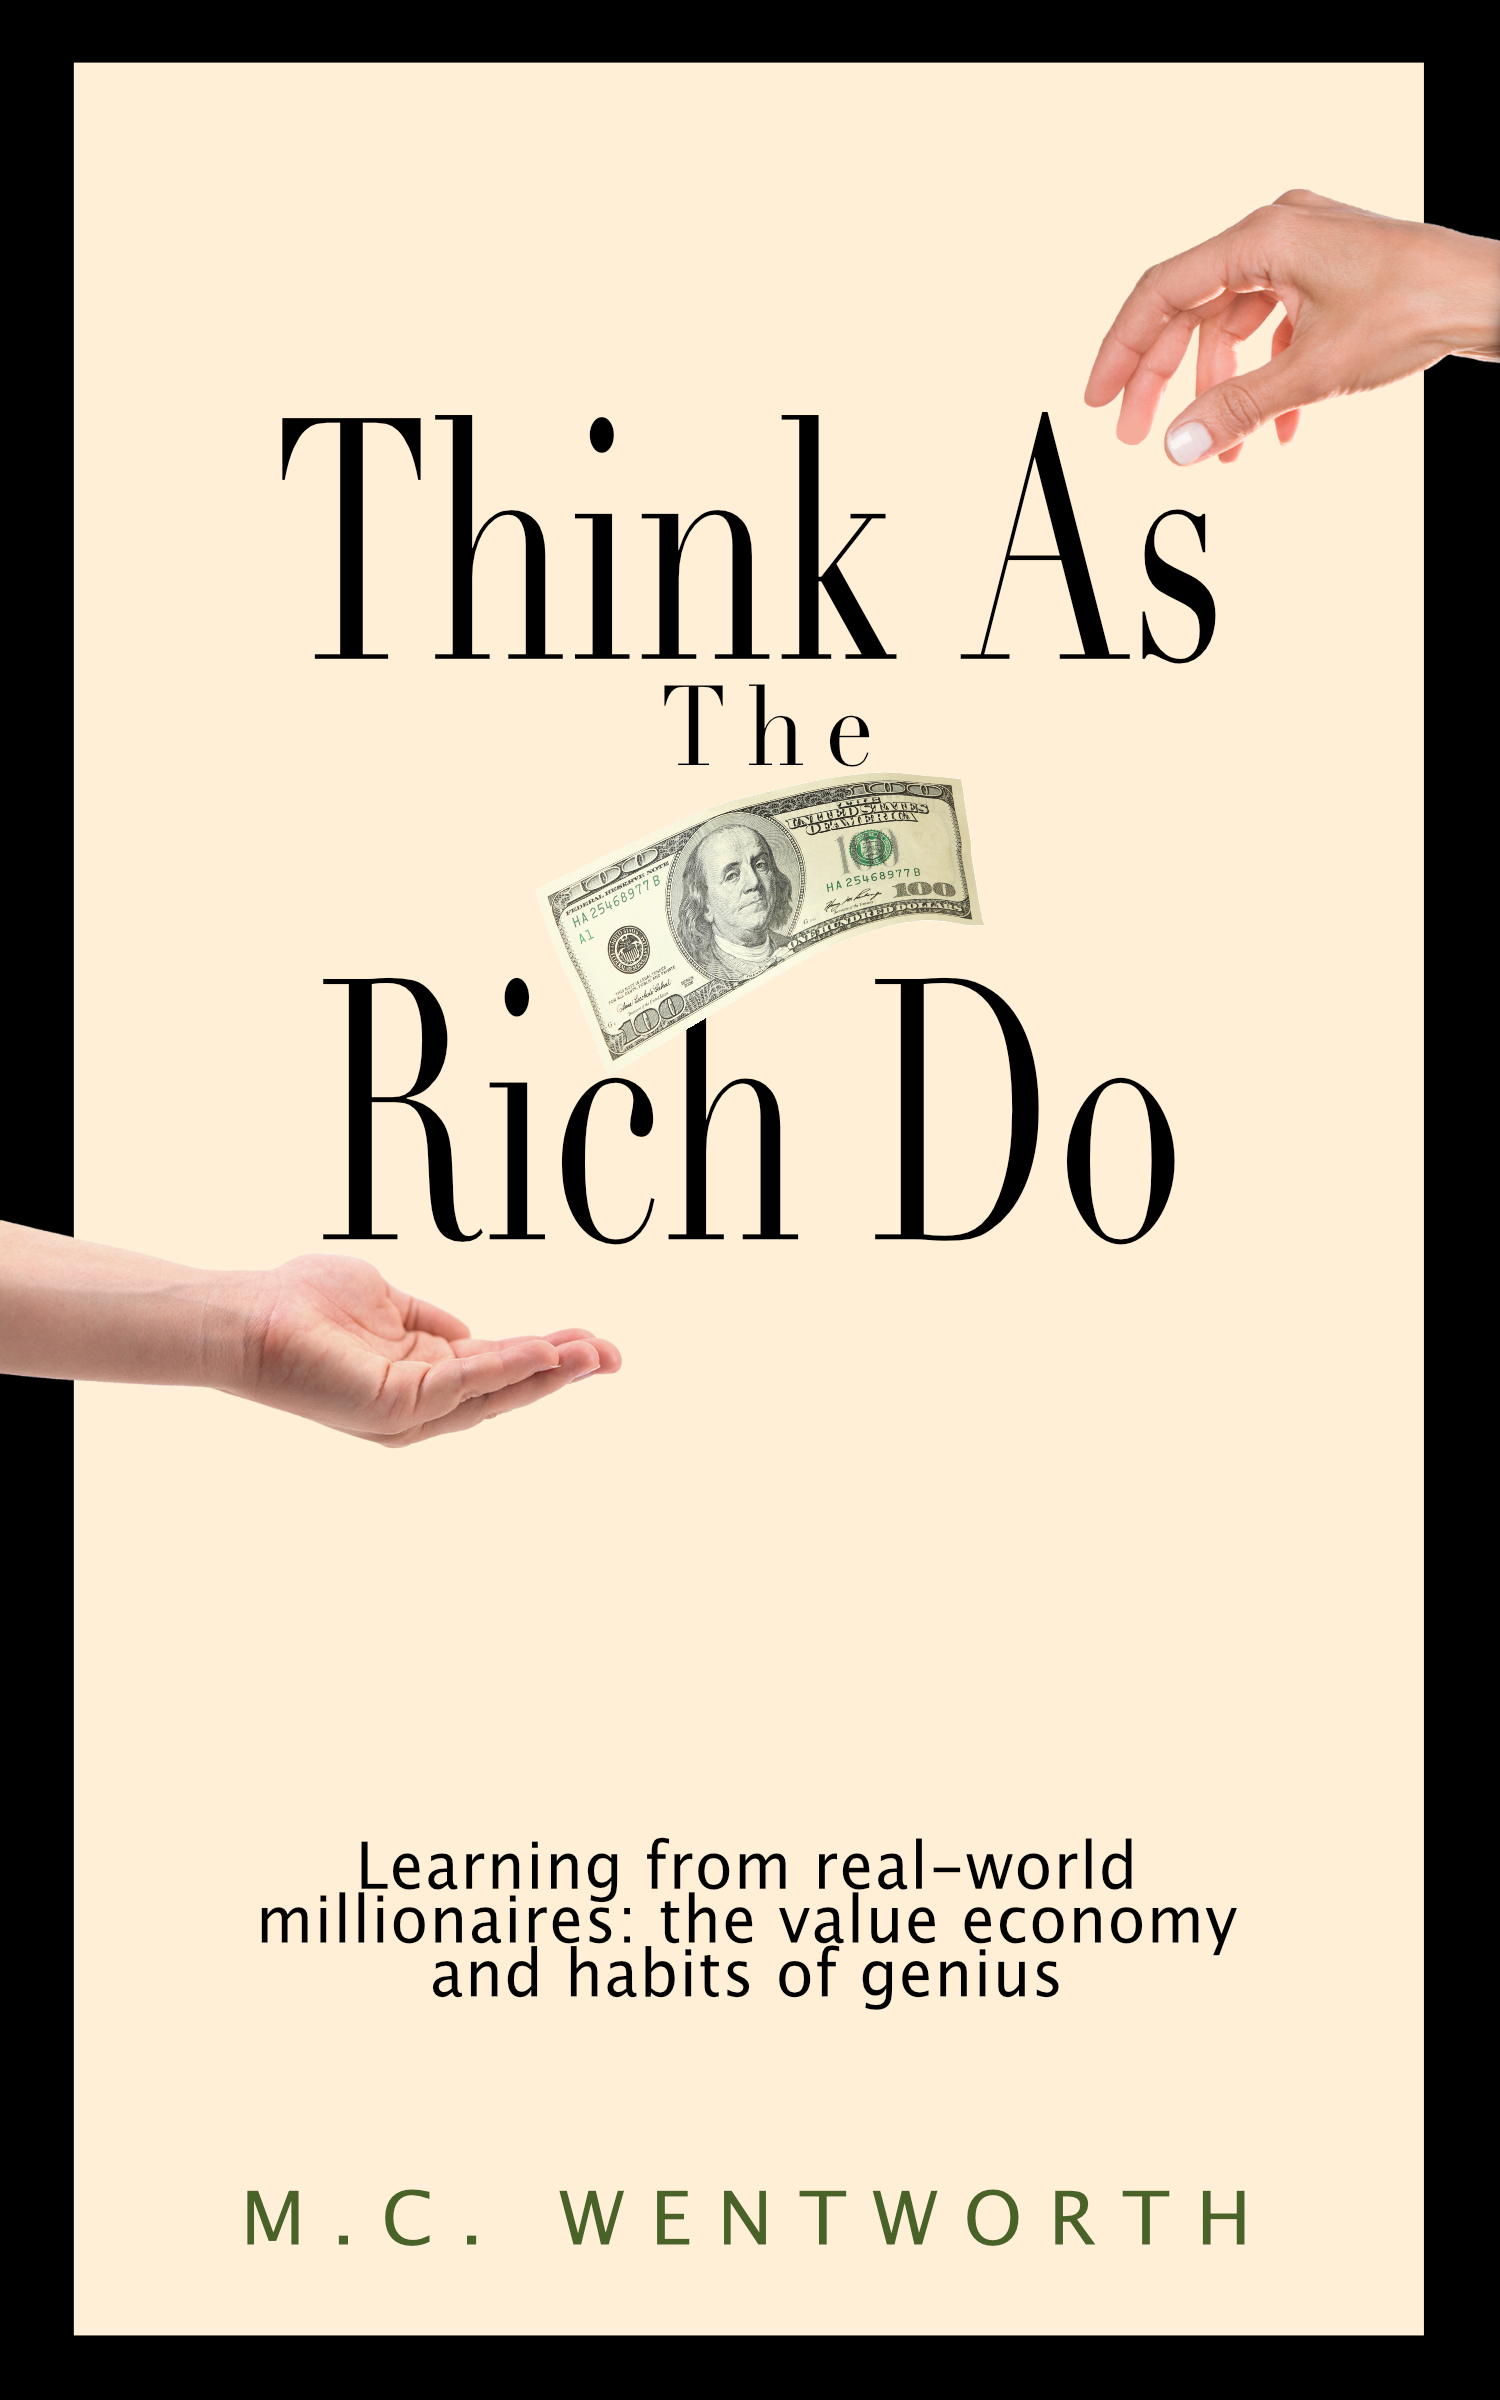 FREE: Think As The Rich Do: Learning from real-world millionaires: the value economy and habits of genius by M.C. Wentworth